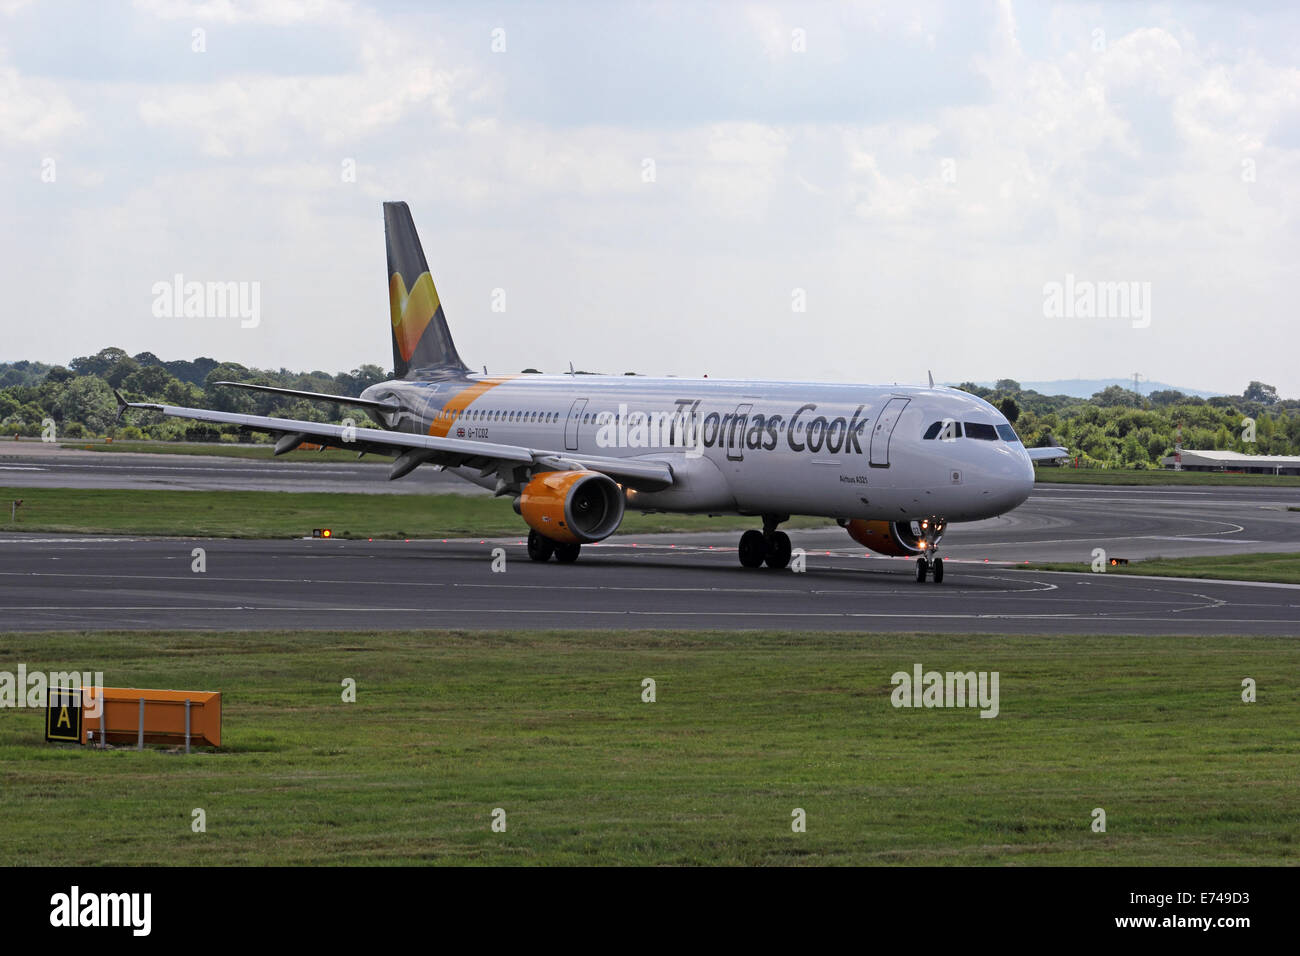 Thomas Cook Airlines Airbus A321-211 Rollen am Manchester International Airport Stockfoto